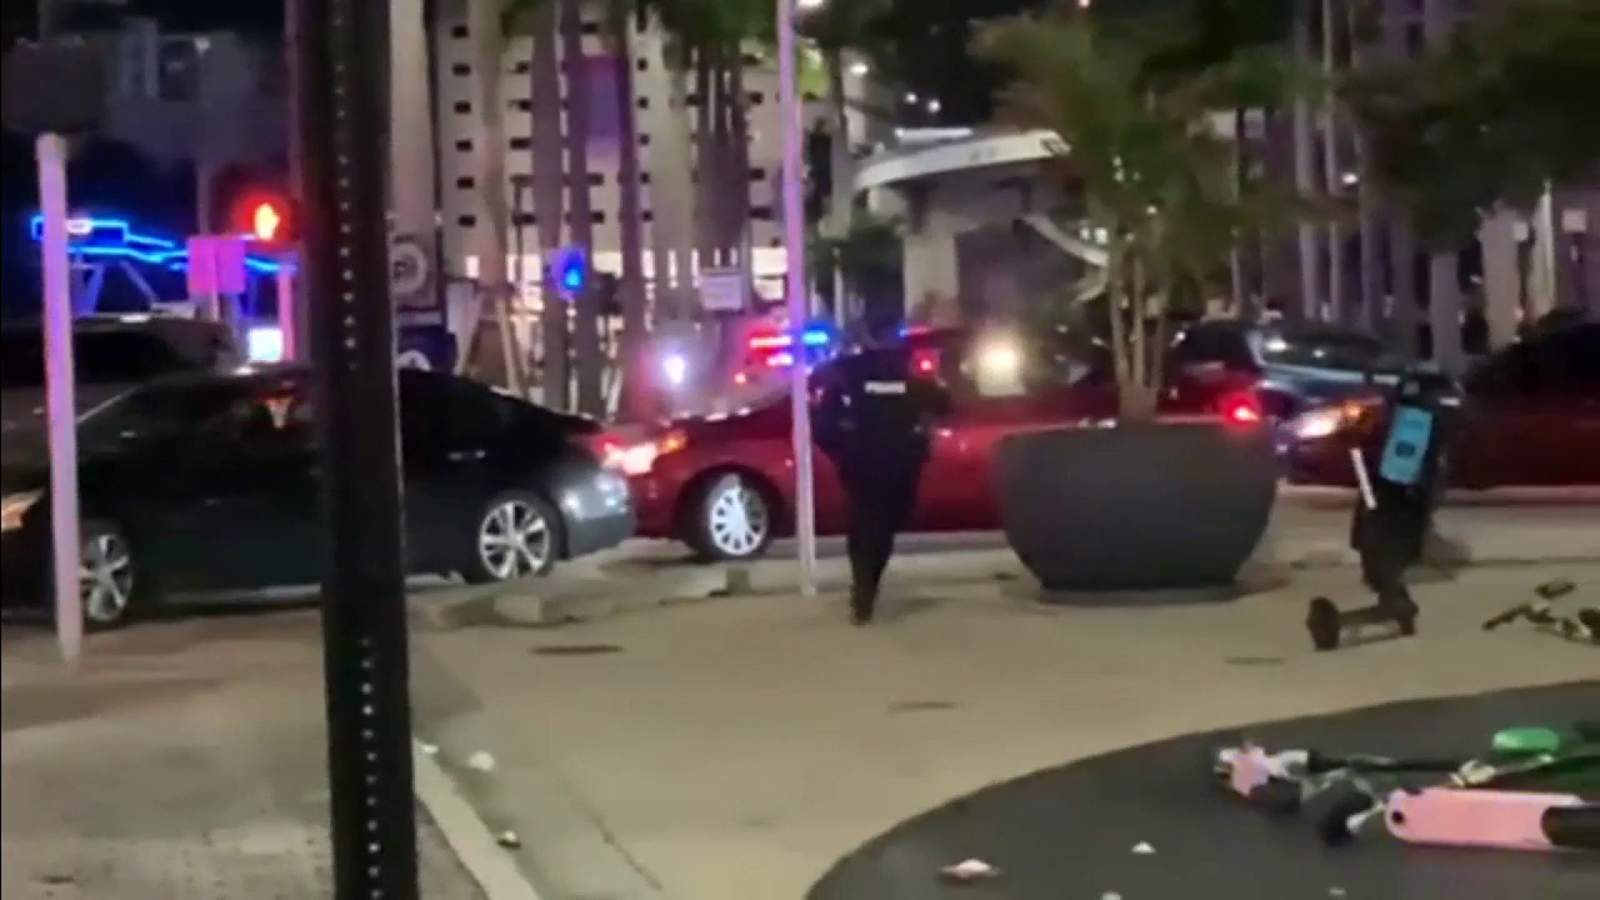 Chaotic scene near Miami’s Bayside on Biscayne after gunfire broke out